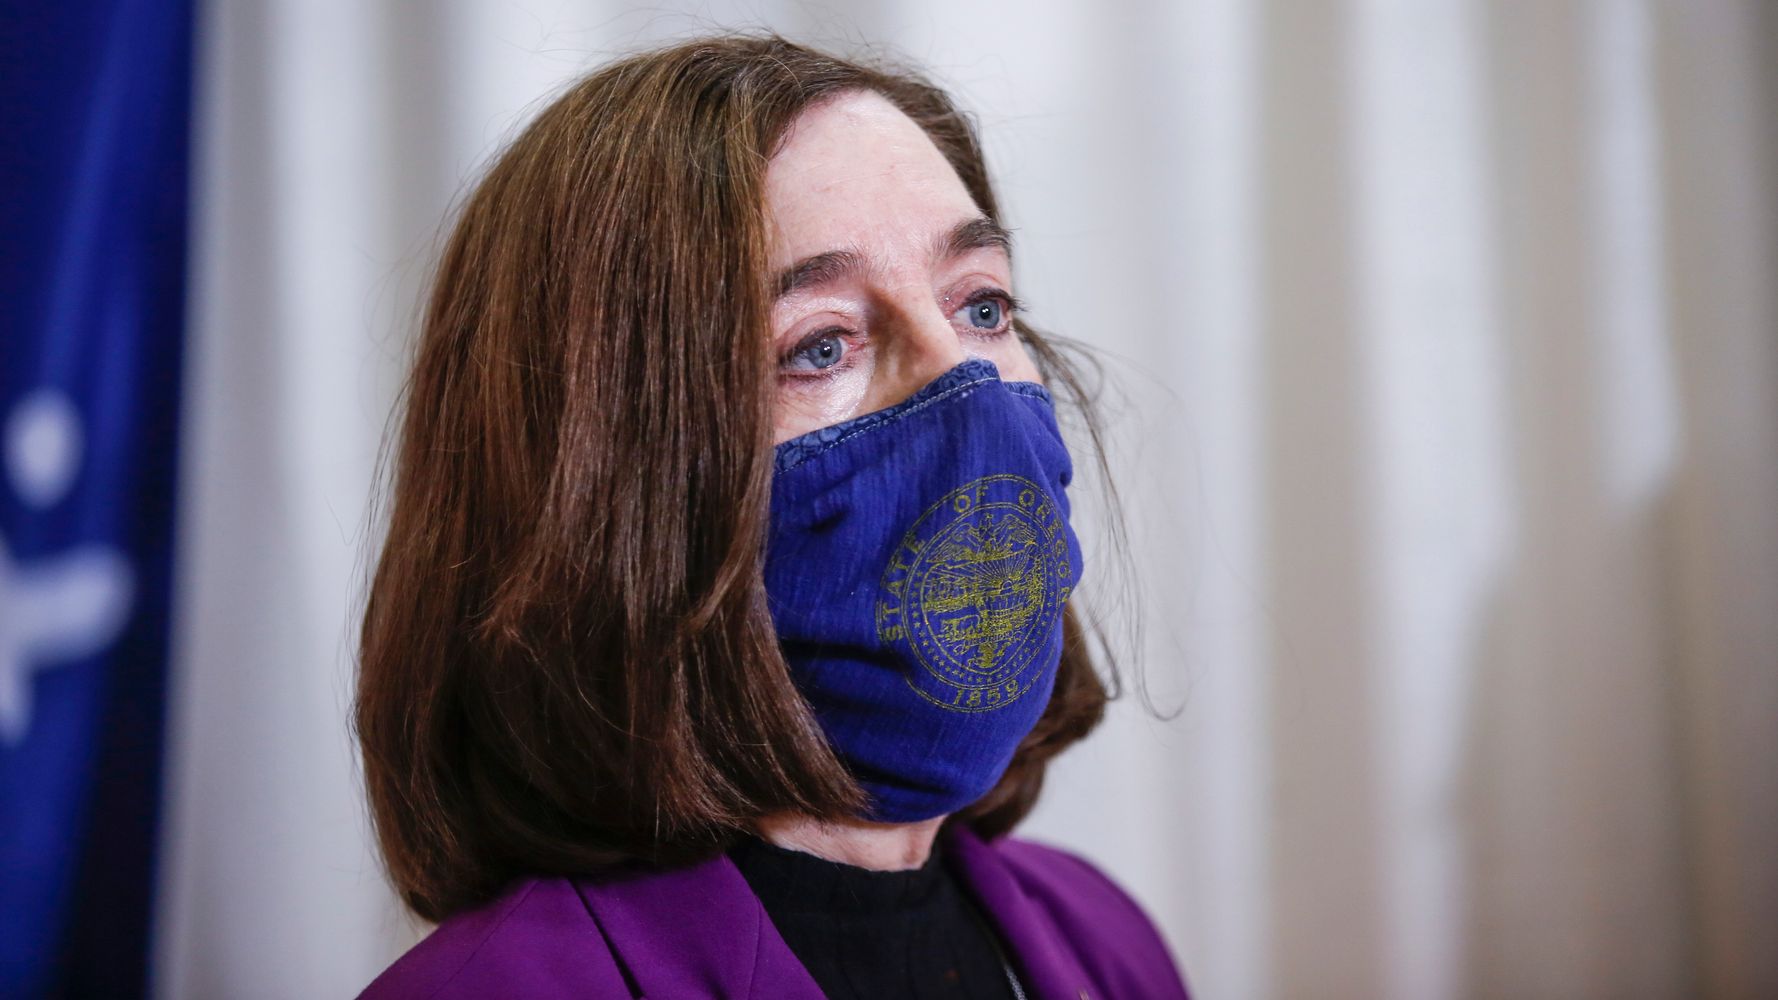 Oregon Is First State To Restore Outdoor Mask Mandate In Most Public Settings